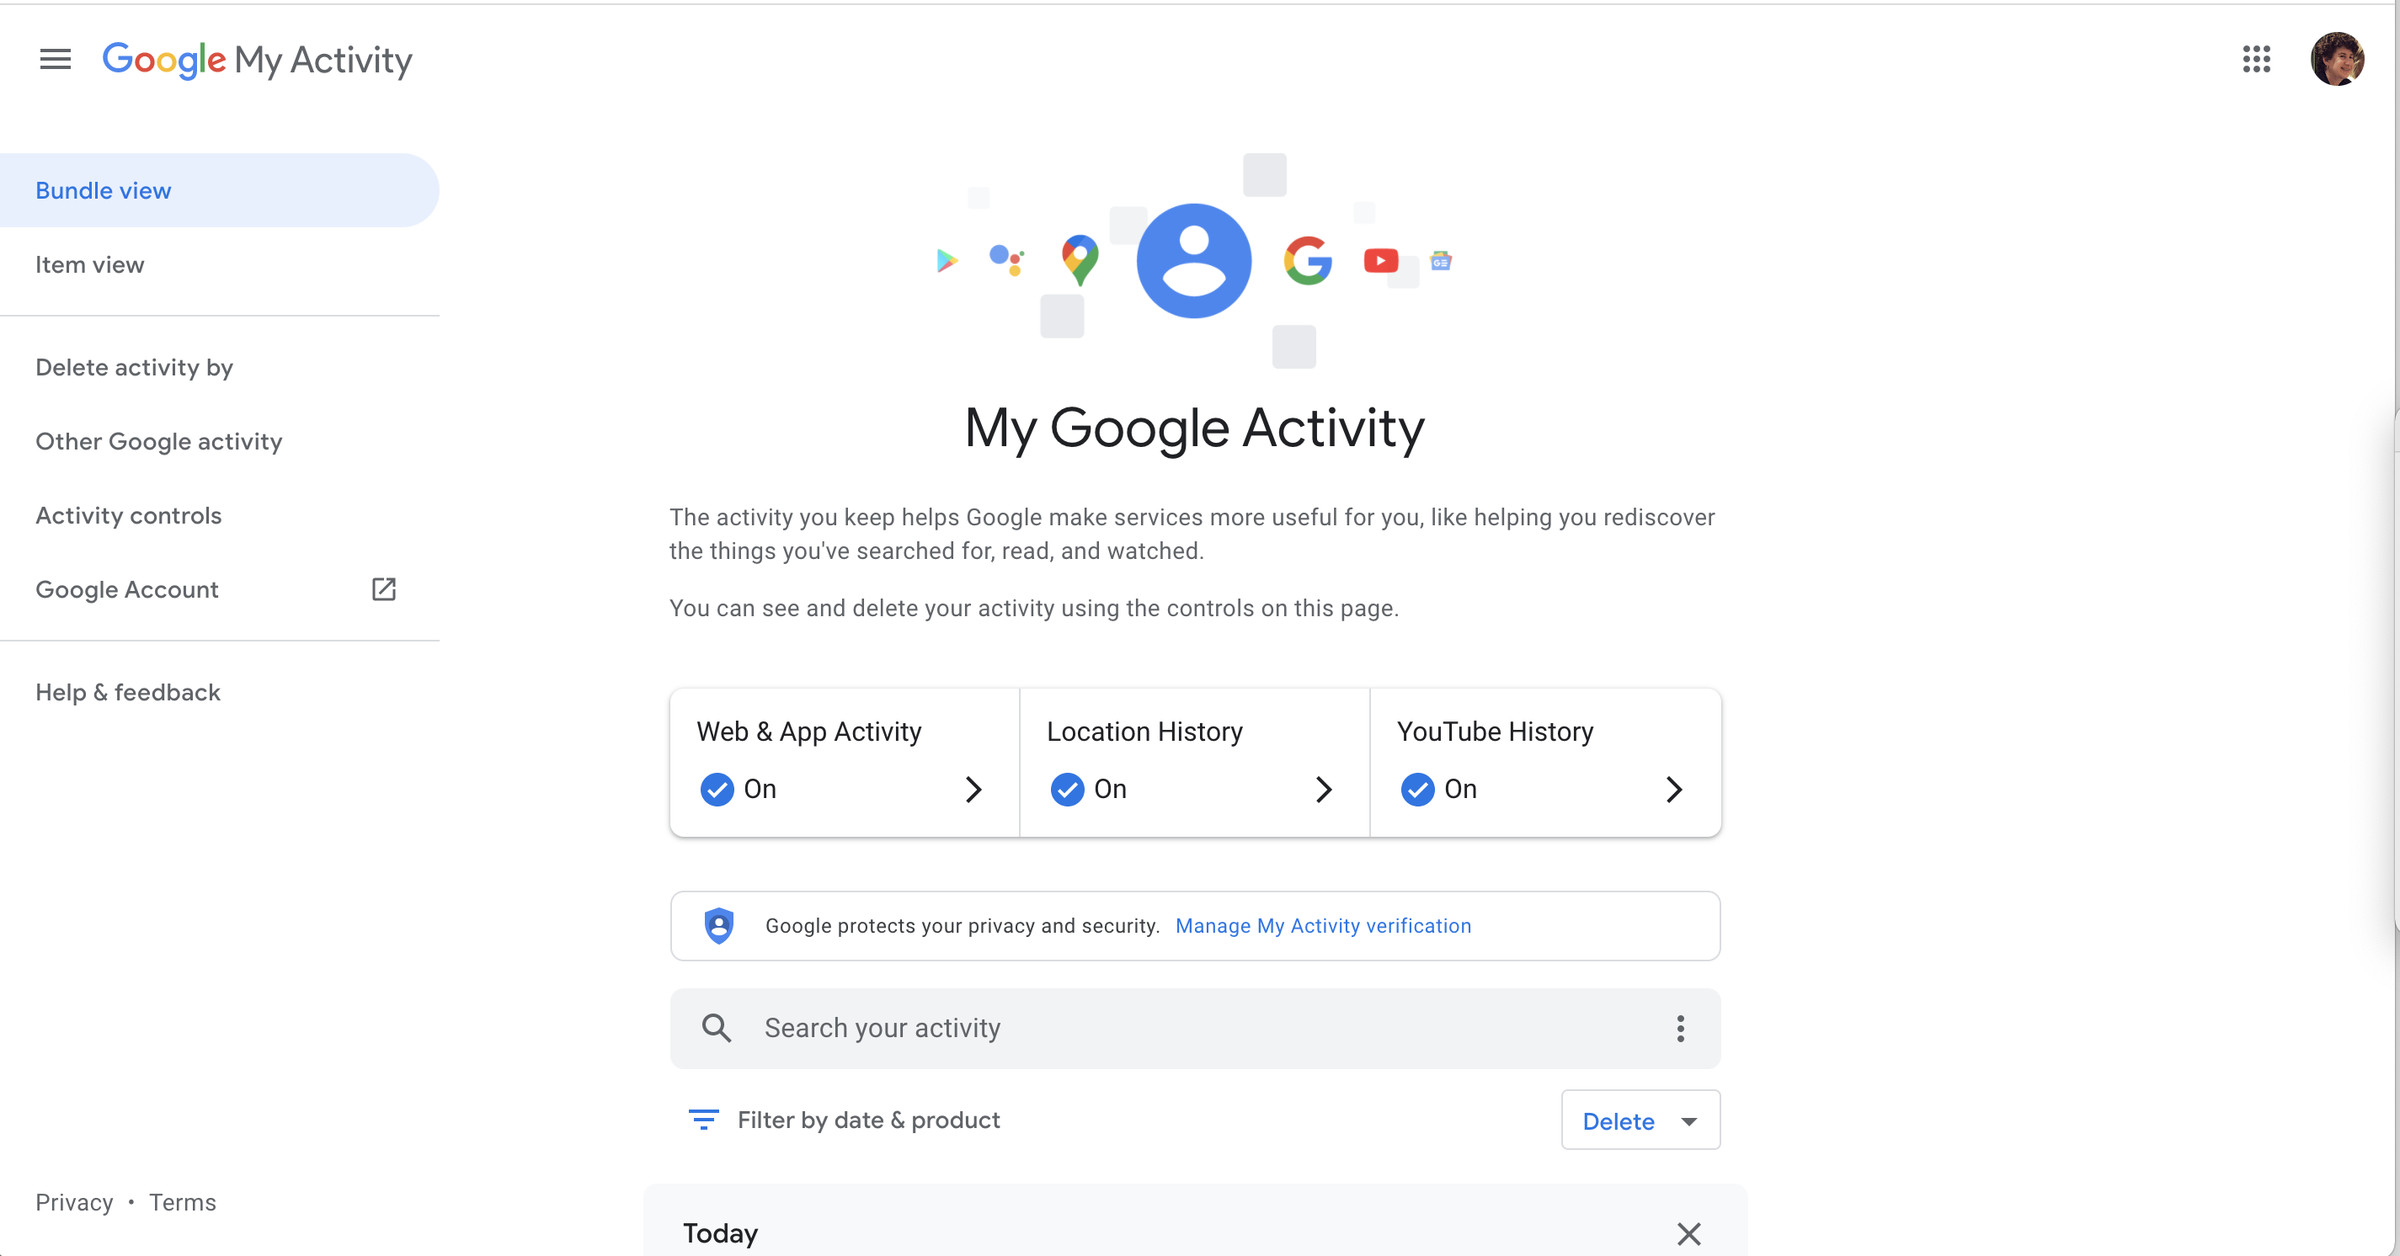 Under “My Google Activity” you’ll see the buttons for three types of activity: Web &amp; App Activity, Location History, and YouTube History.